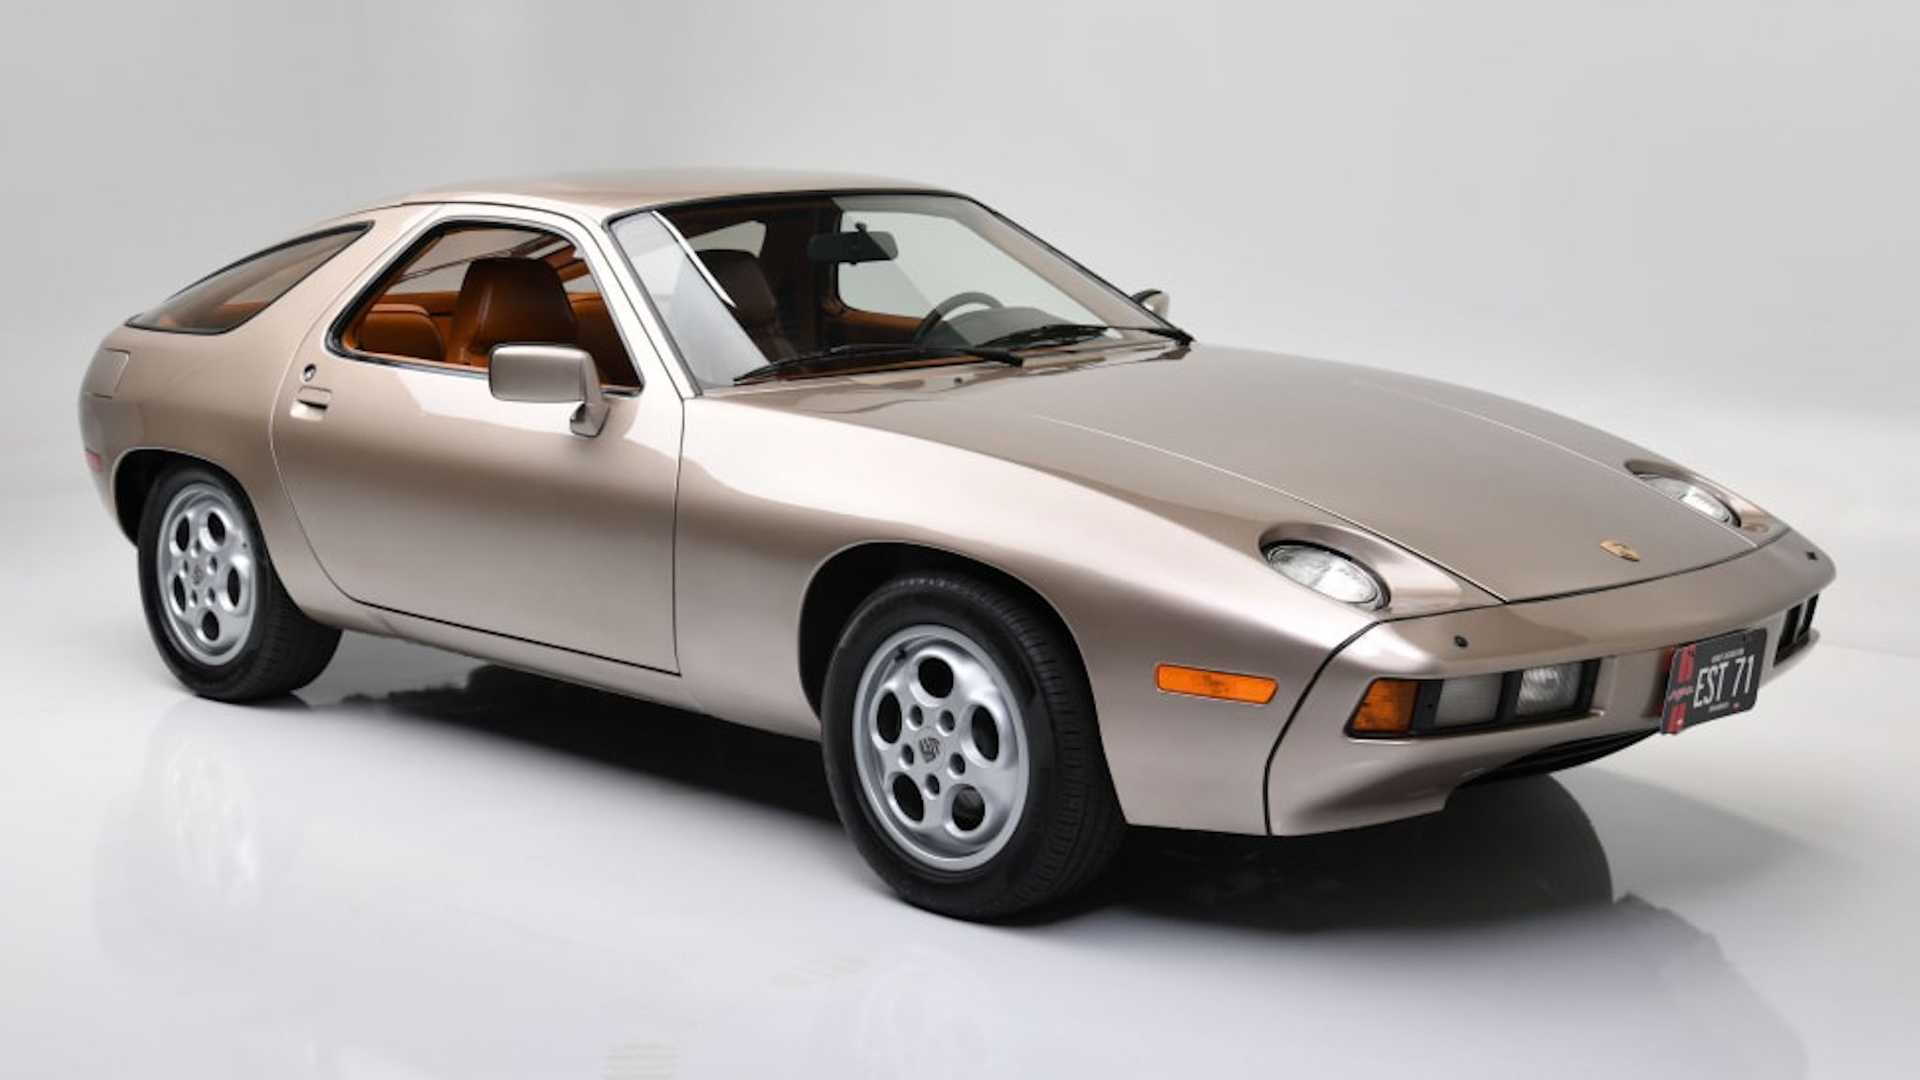 1979 Porsche 928 used during filming of “Risky Business” - Photo credit: Barrett-Jackson